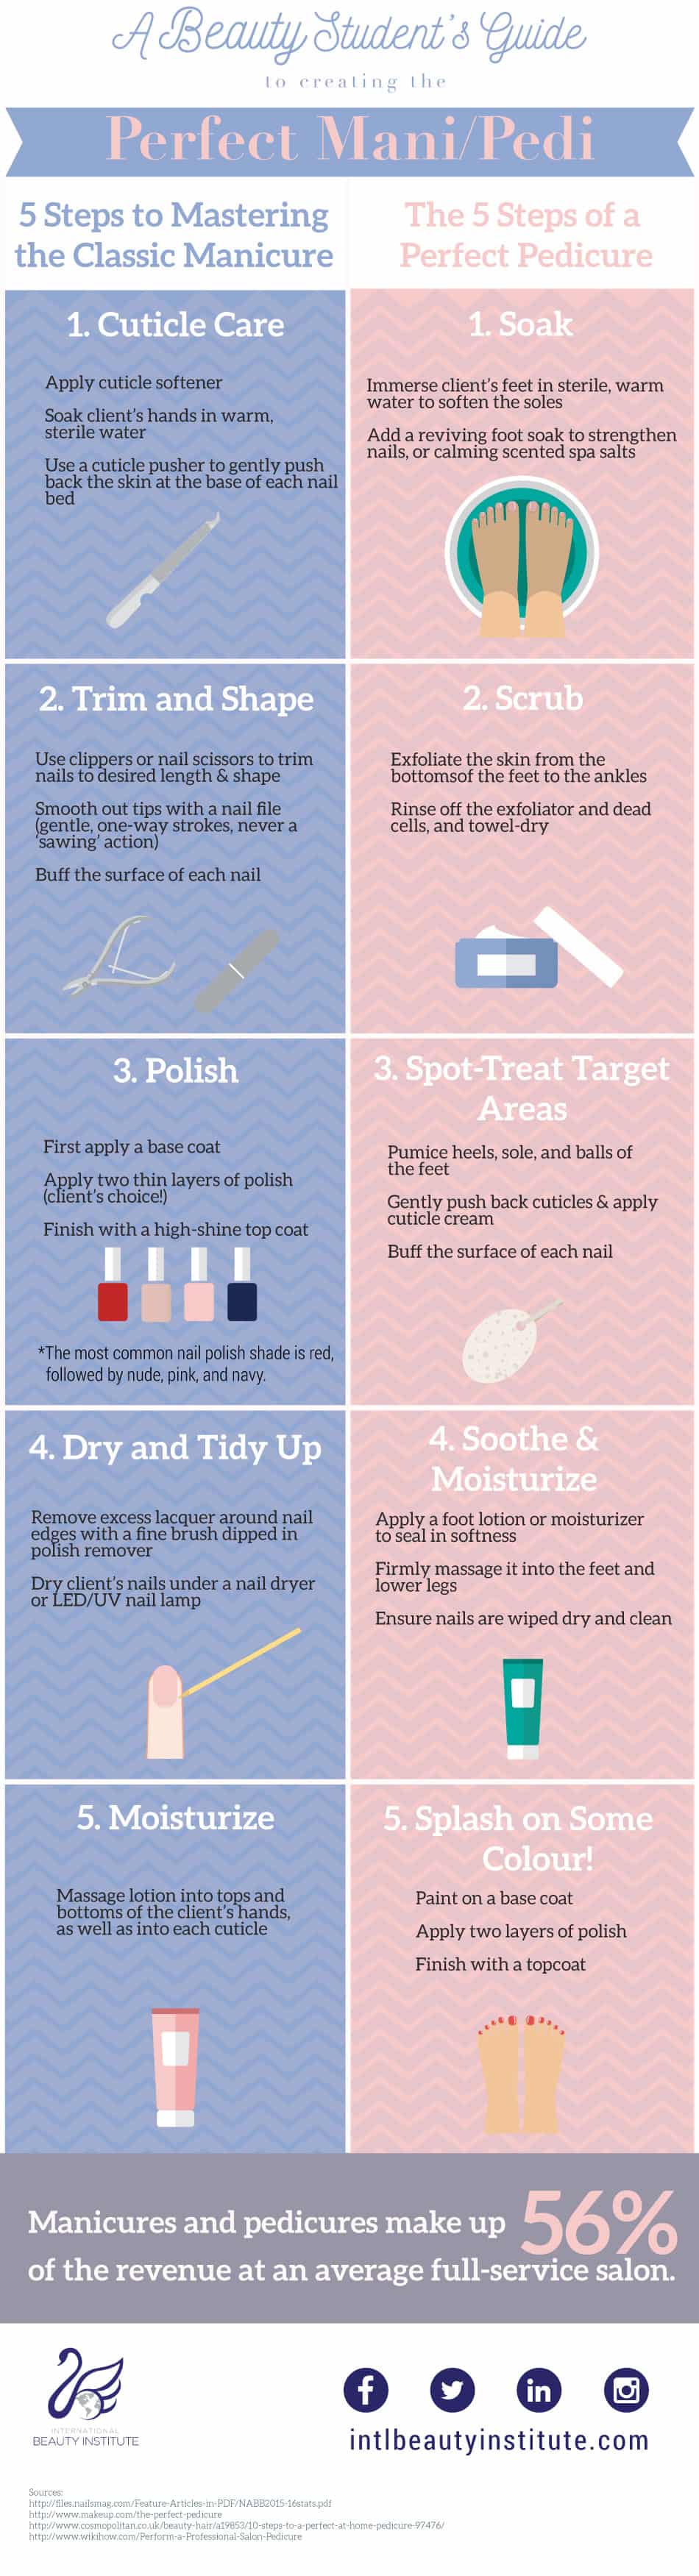 [Infographic]: A Beauty Student’s Guide to Creating the Perfect Mani/Pedi